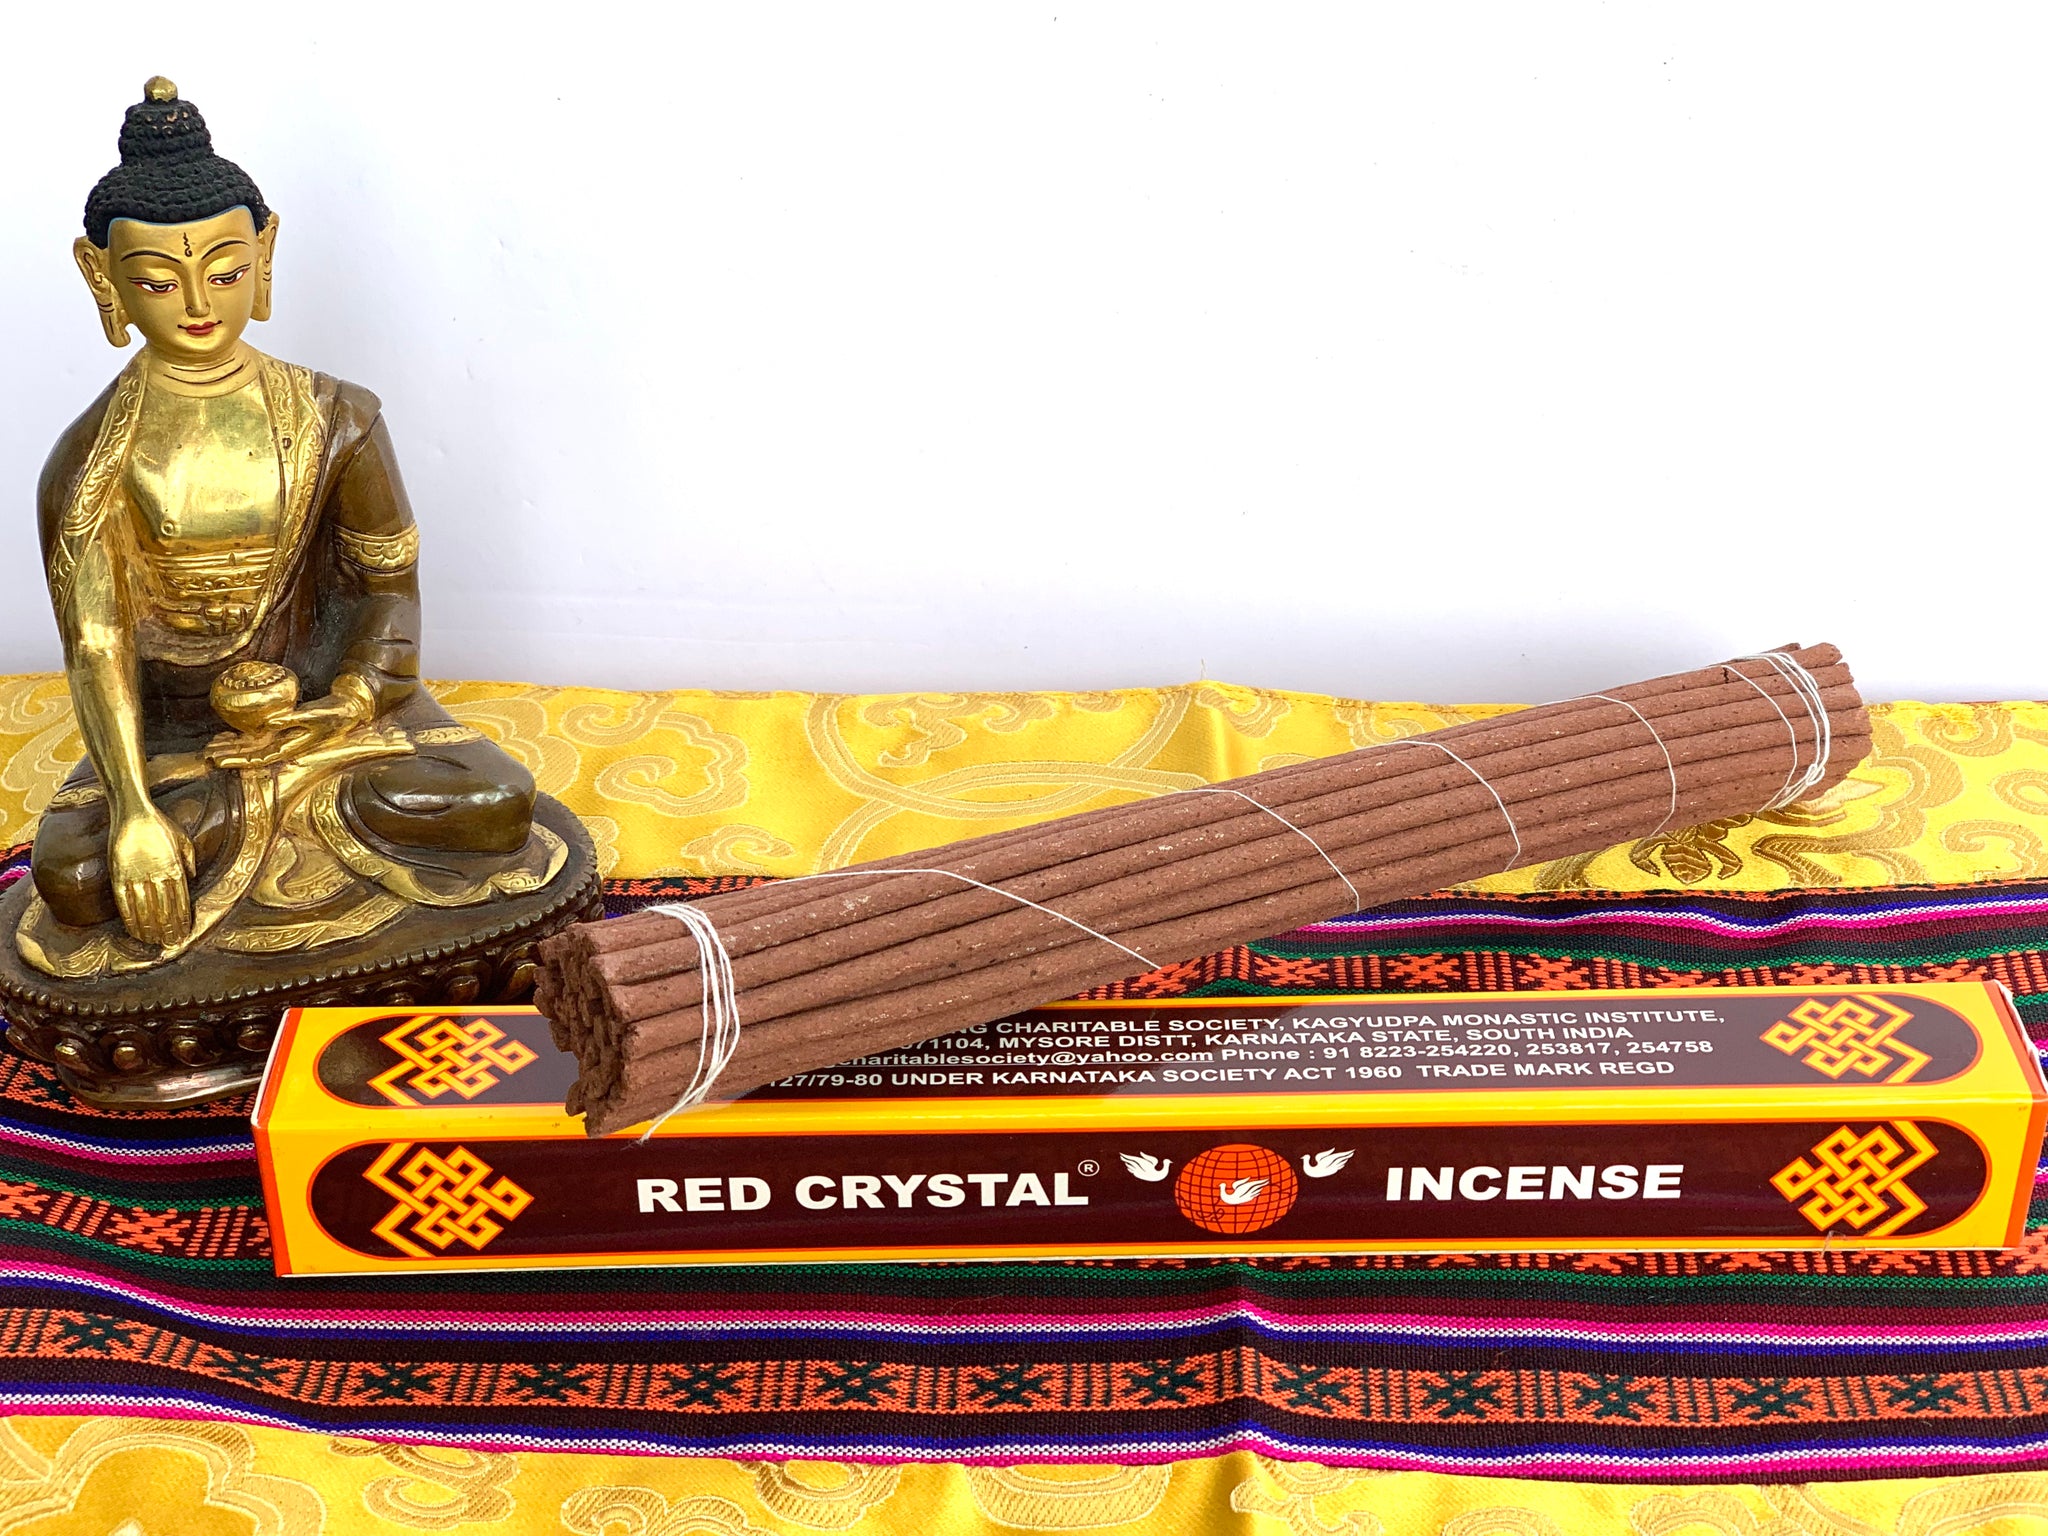 RED CRYSTAL INCENSE